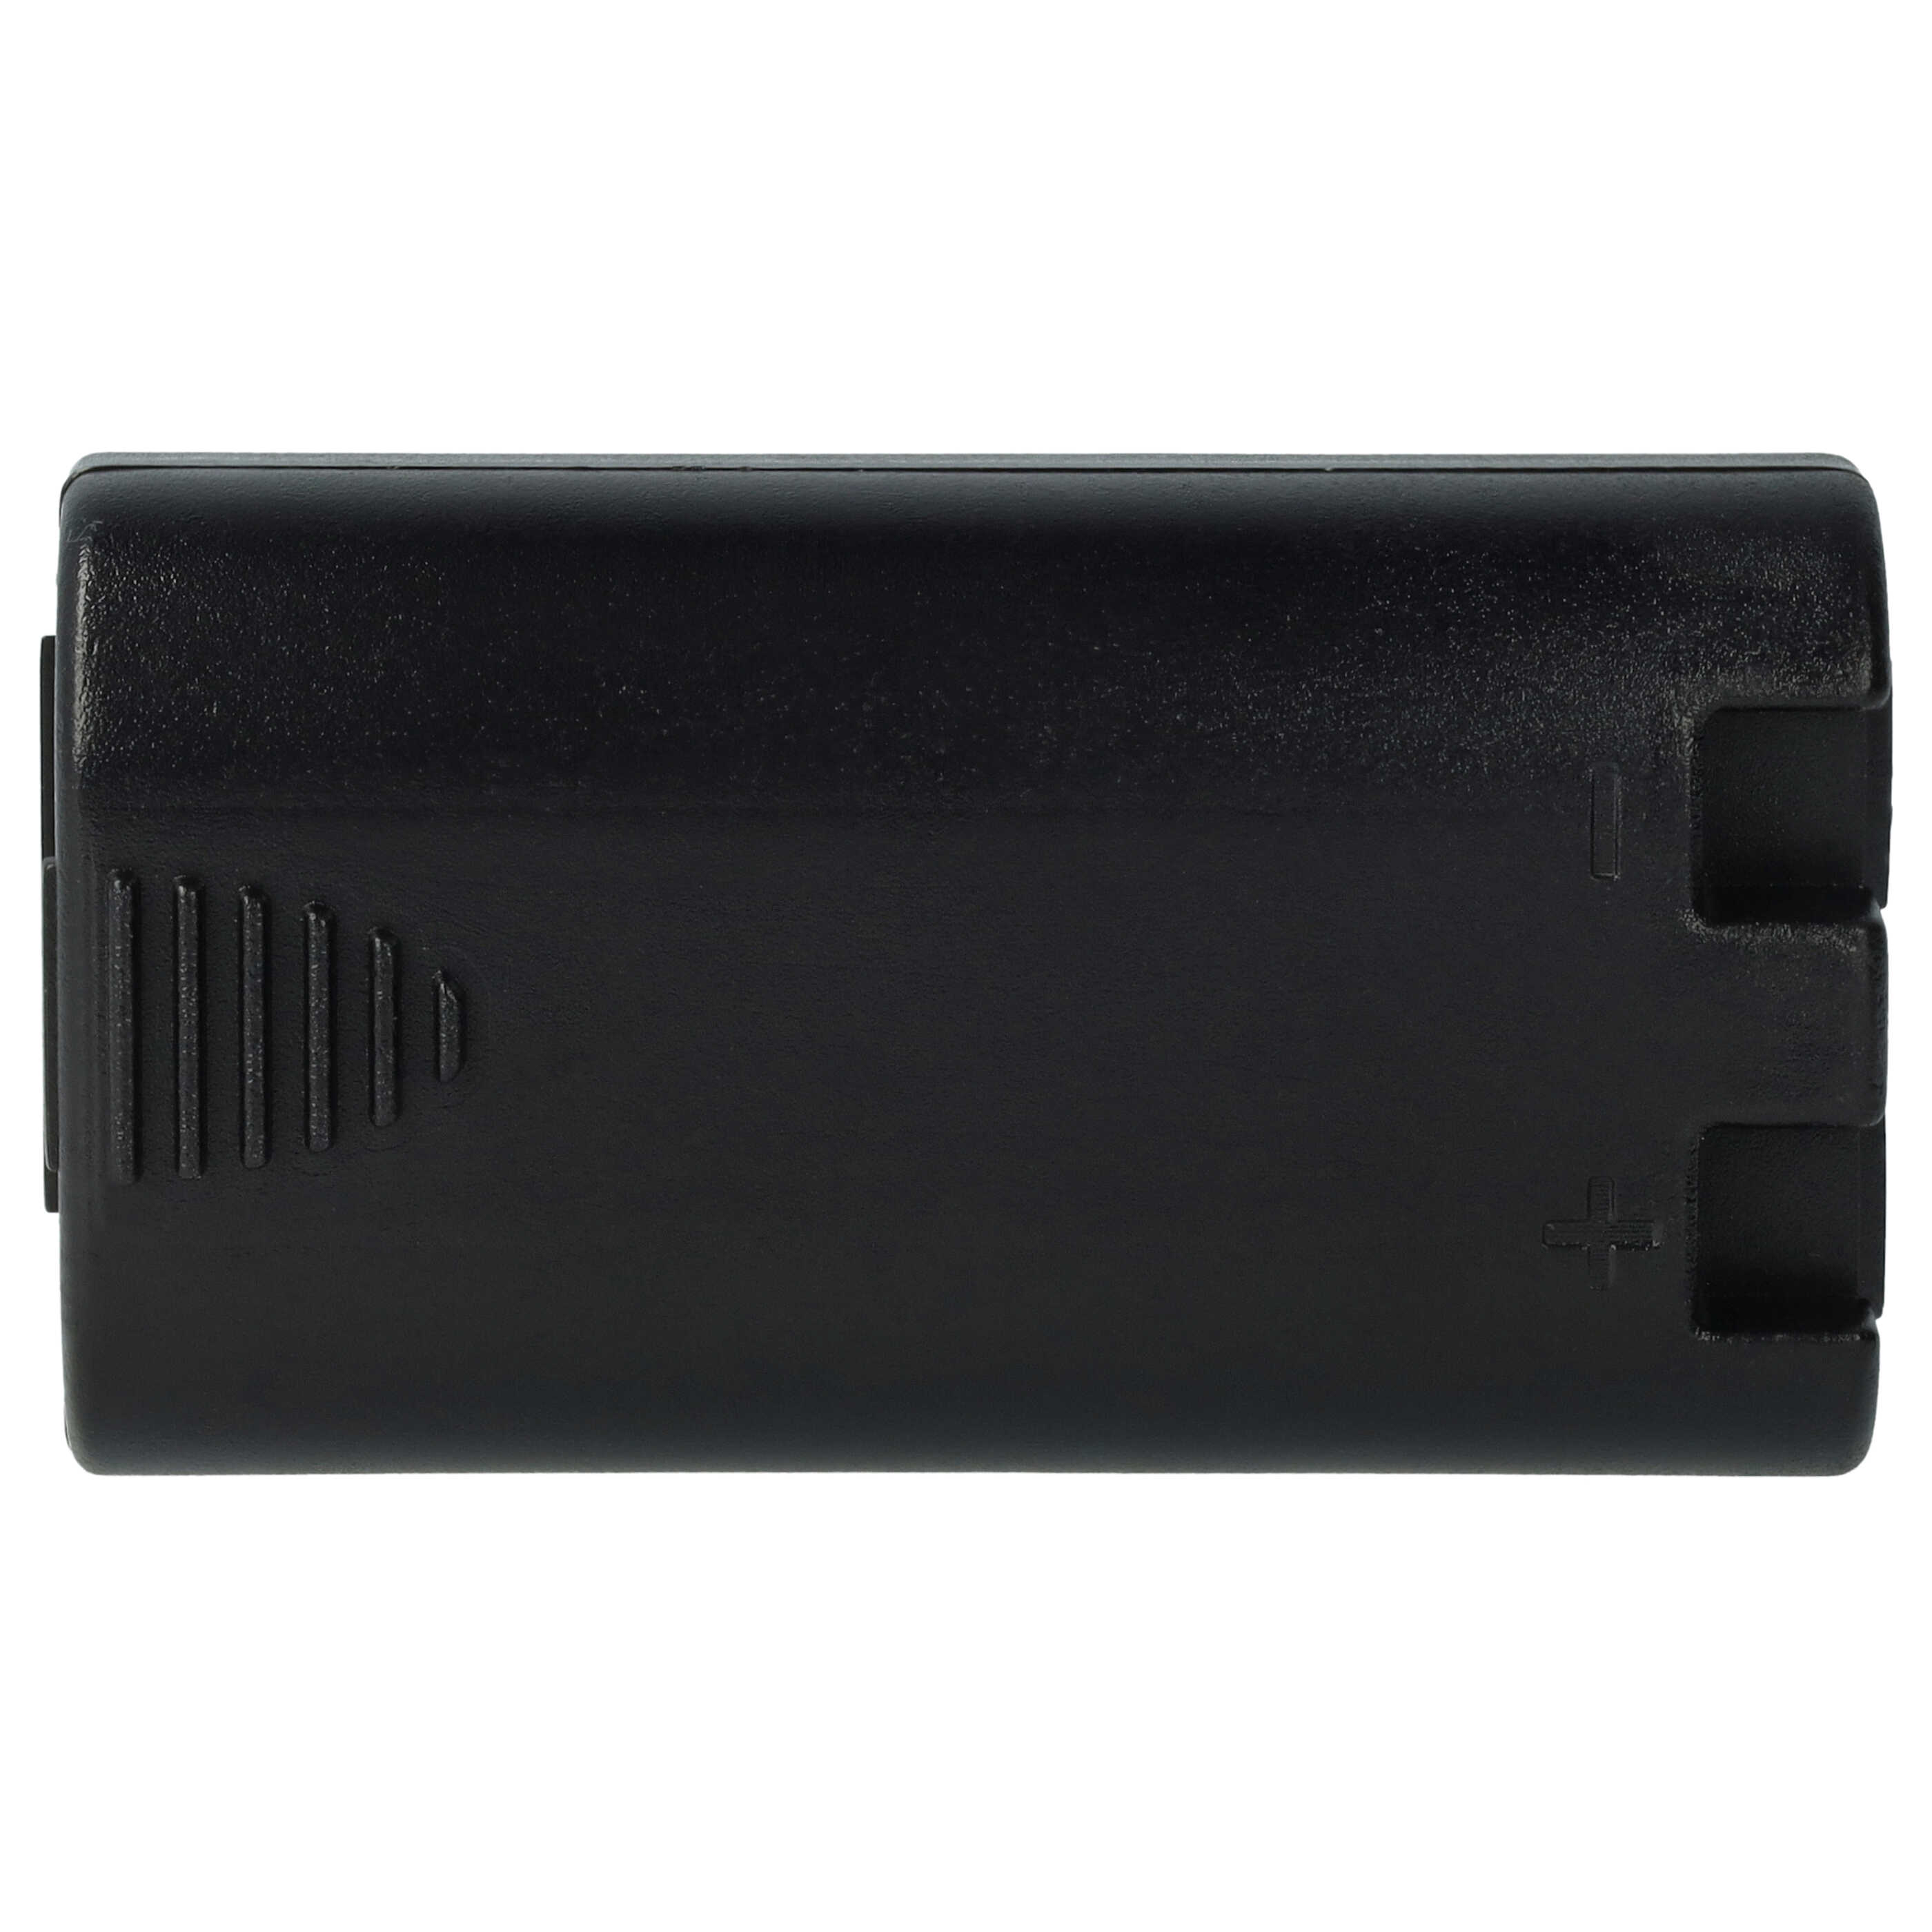 Printer Battery Replacement for 3M W003688, S0895880 - 1000mAh 7.4V Li-Ion